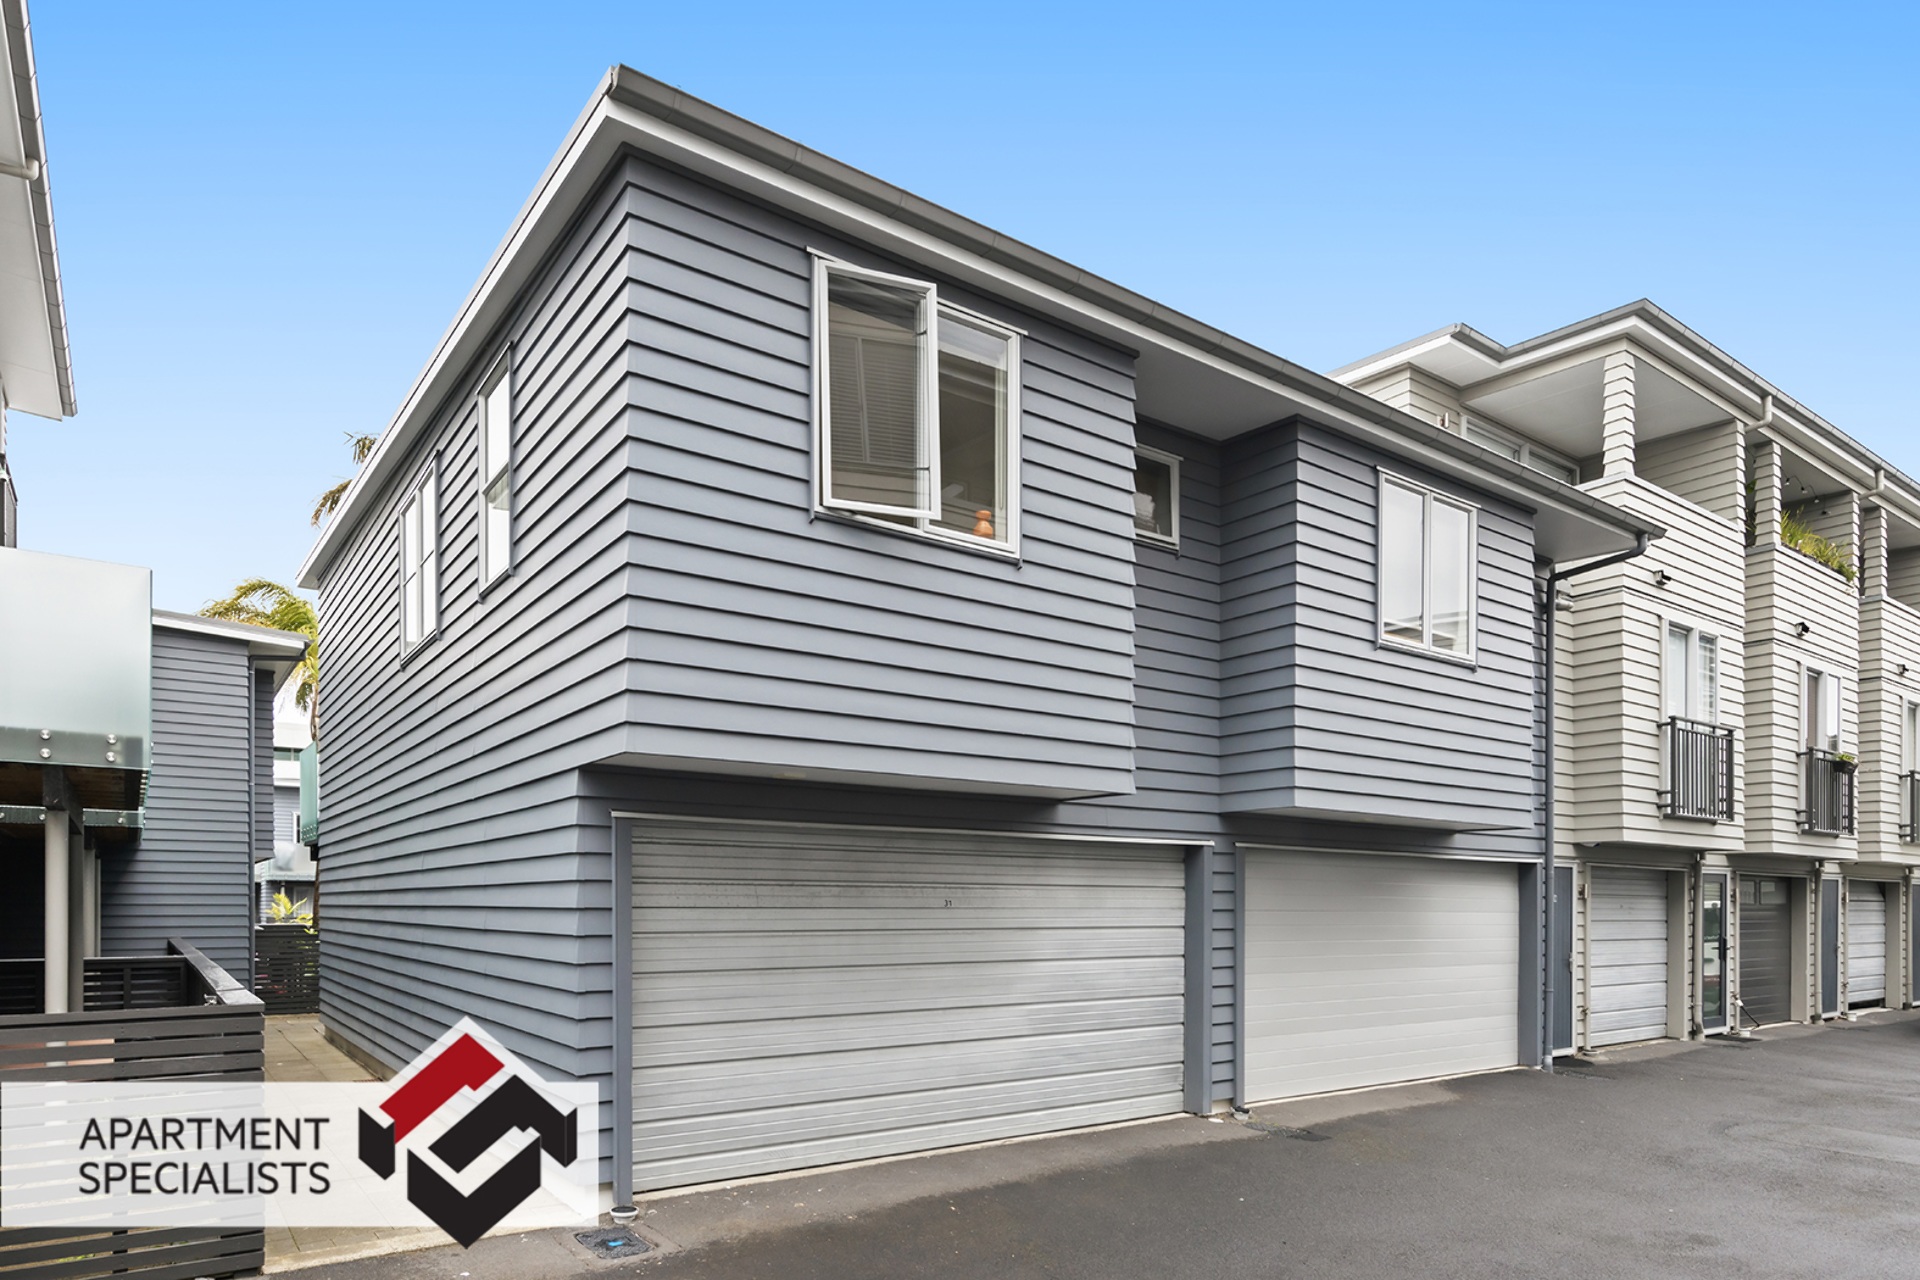 20 | 26 Mary Street, Mount Eden | Apartment Specialists